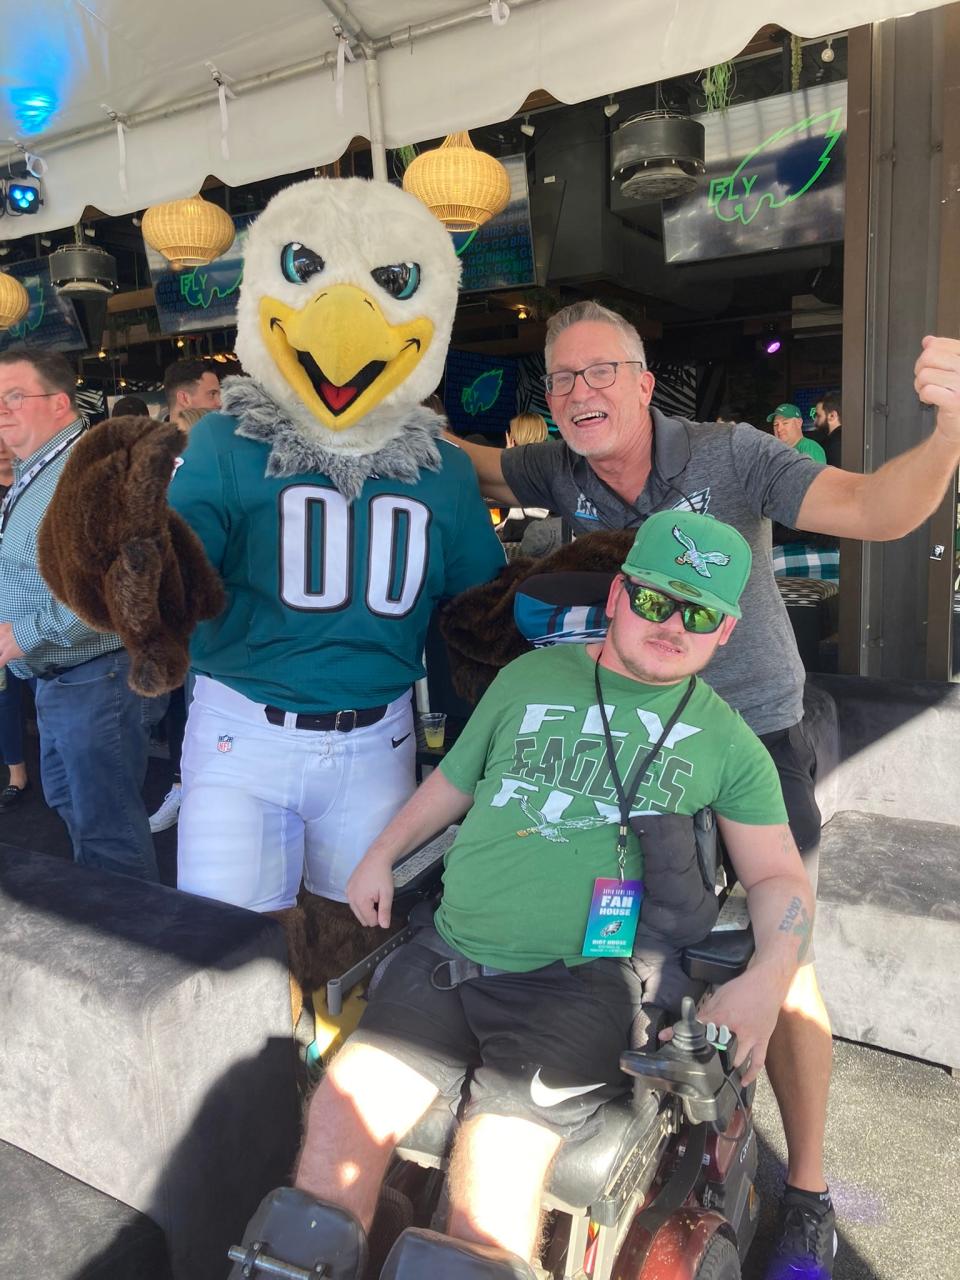 Austin Lauer (bottom right) and his father George Lauer with Swoop, the Philadelphia Eagles' mascot, at the Eagles' VIP tailgate party prior to Super Bowl LVII in Arizona.